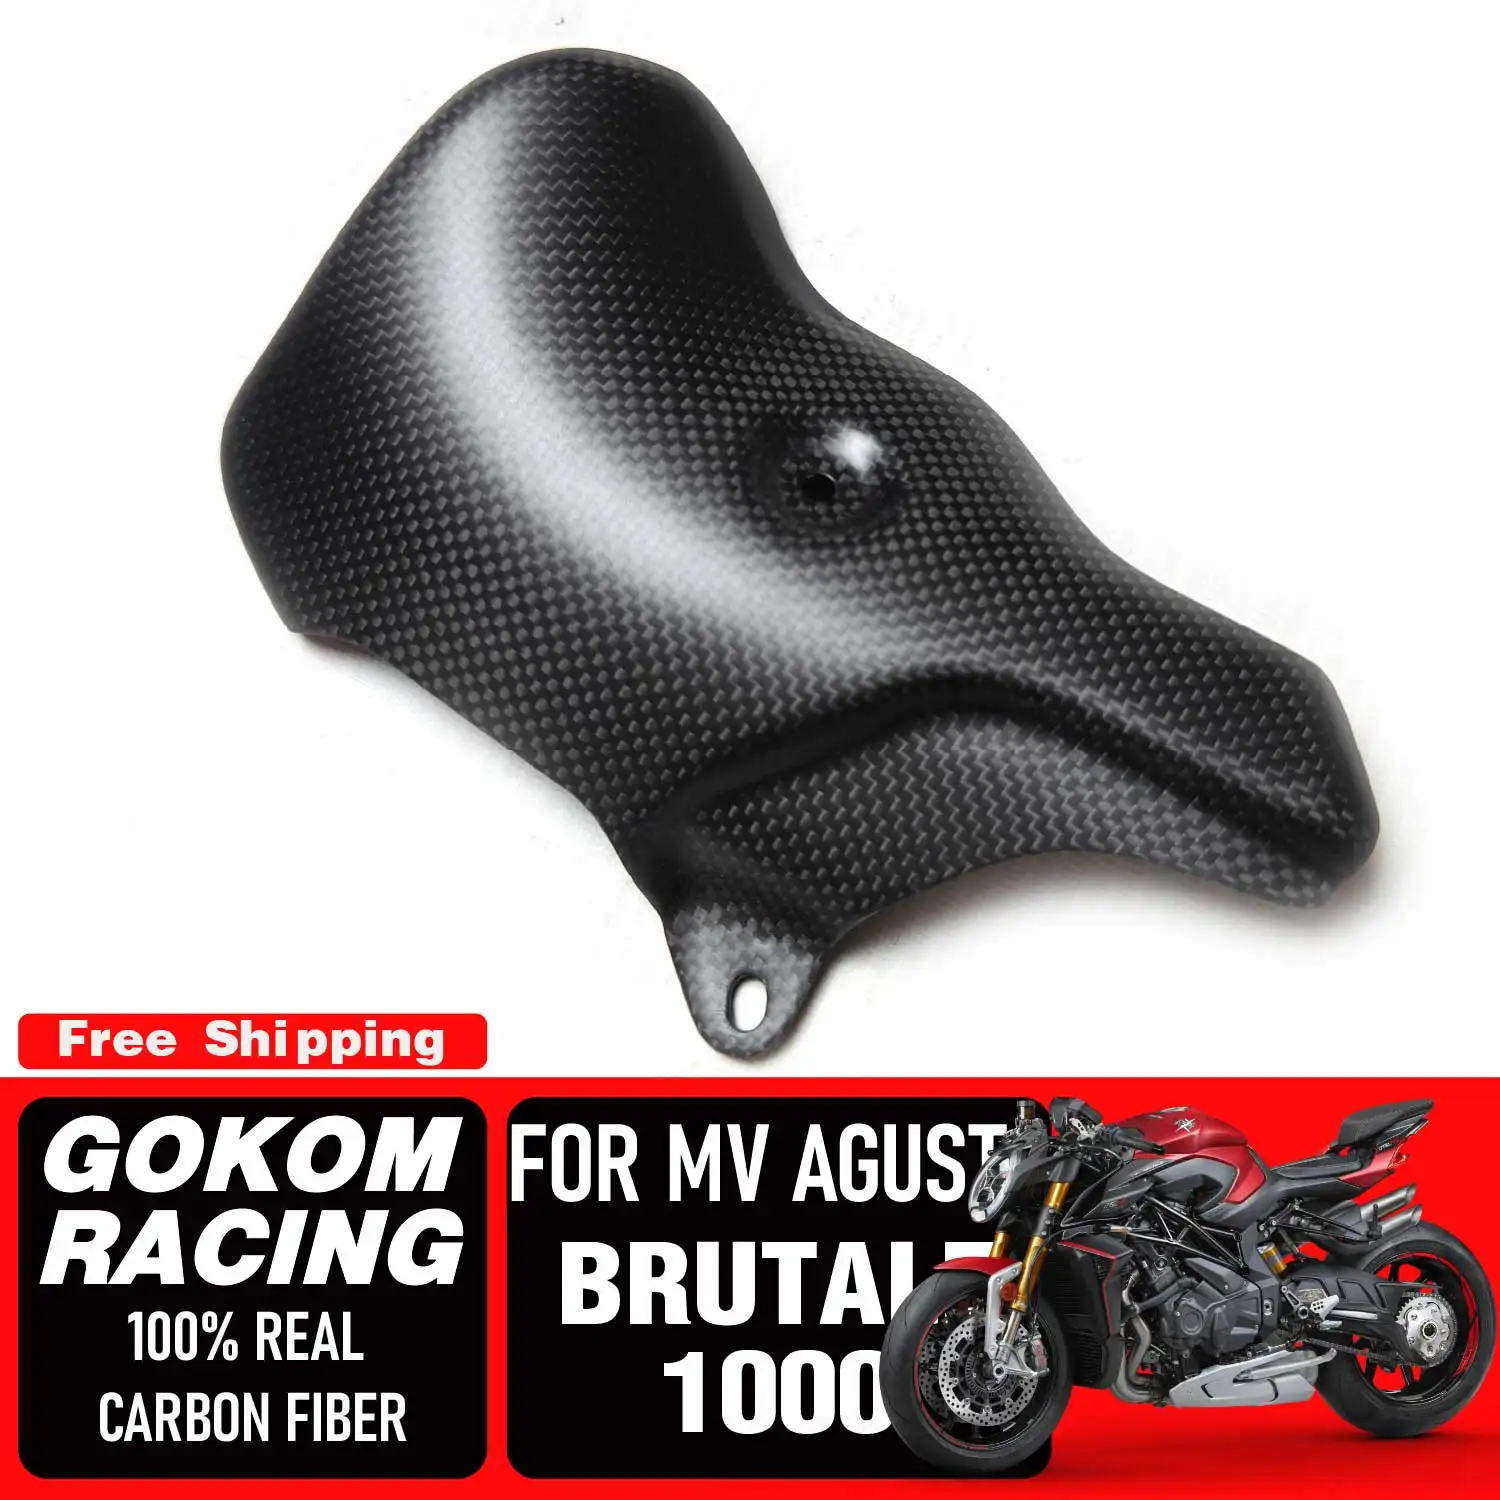 

Gokom Racing For MV AGUSTA Brutale1000 Exhaust protection Cover COWLING FAIRING 100% REAL CARBON FIBER MOTORCYCLE ACCESSORIES